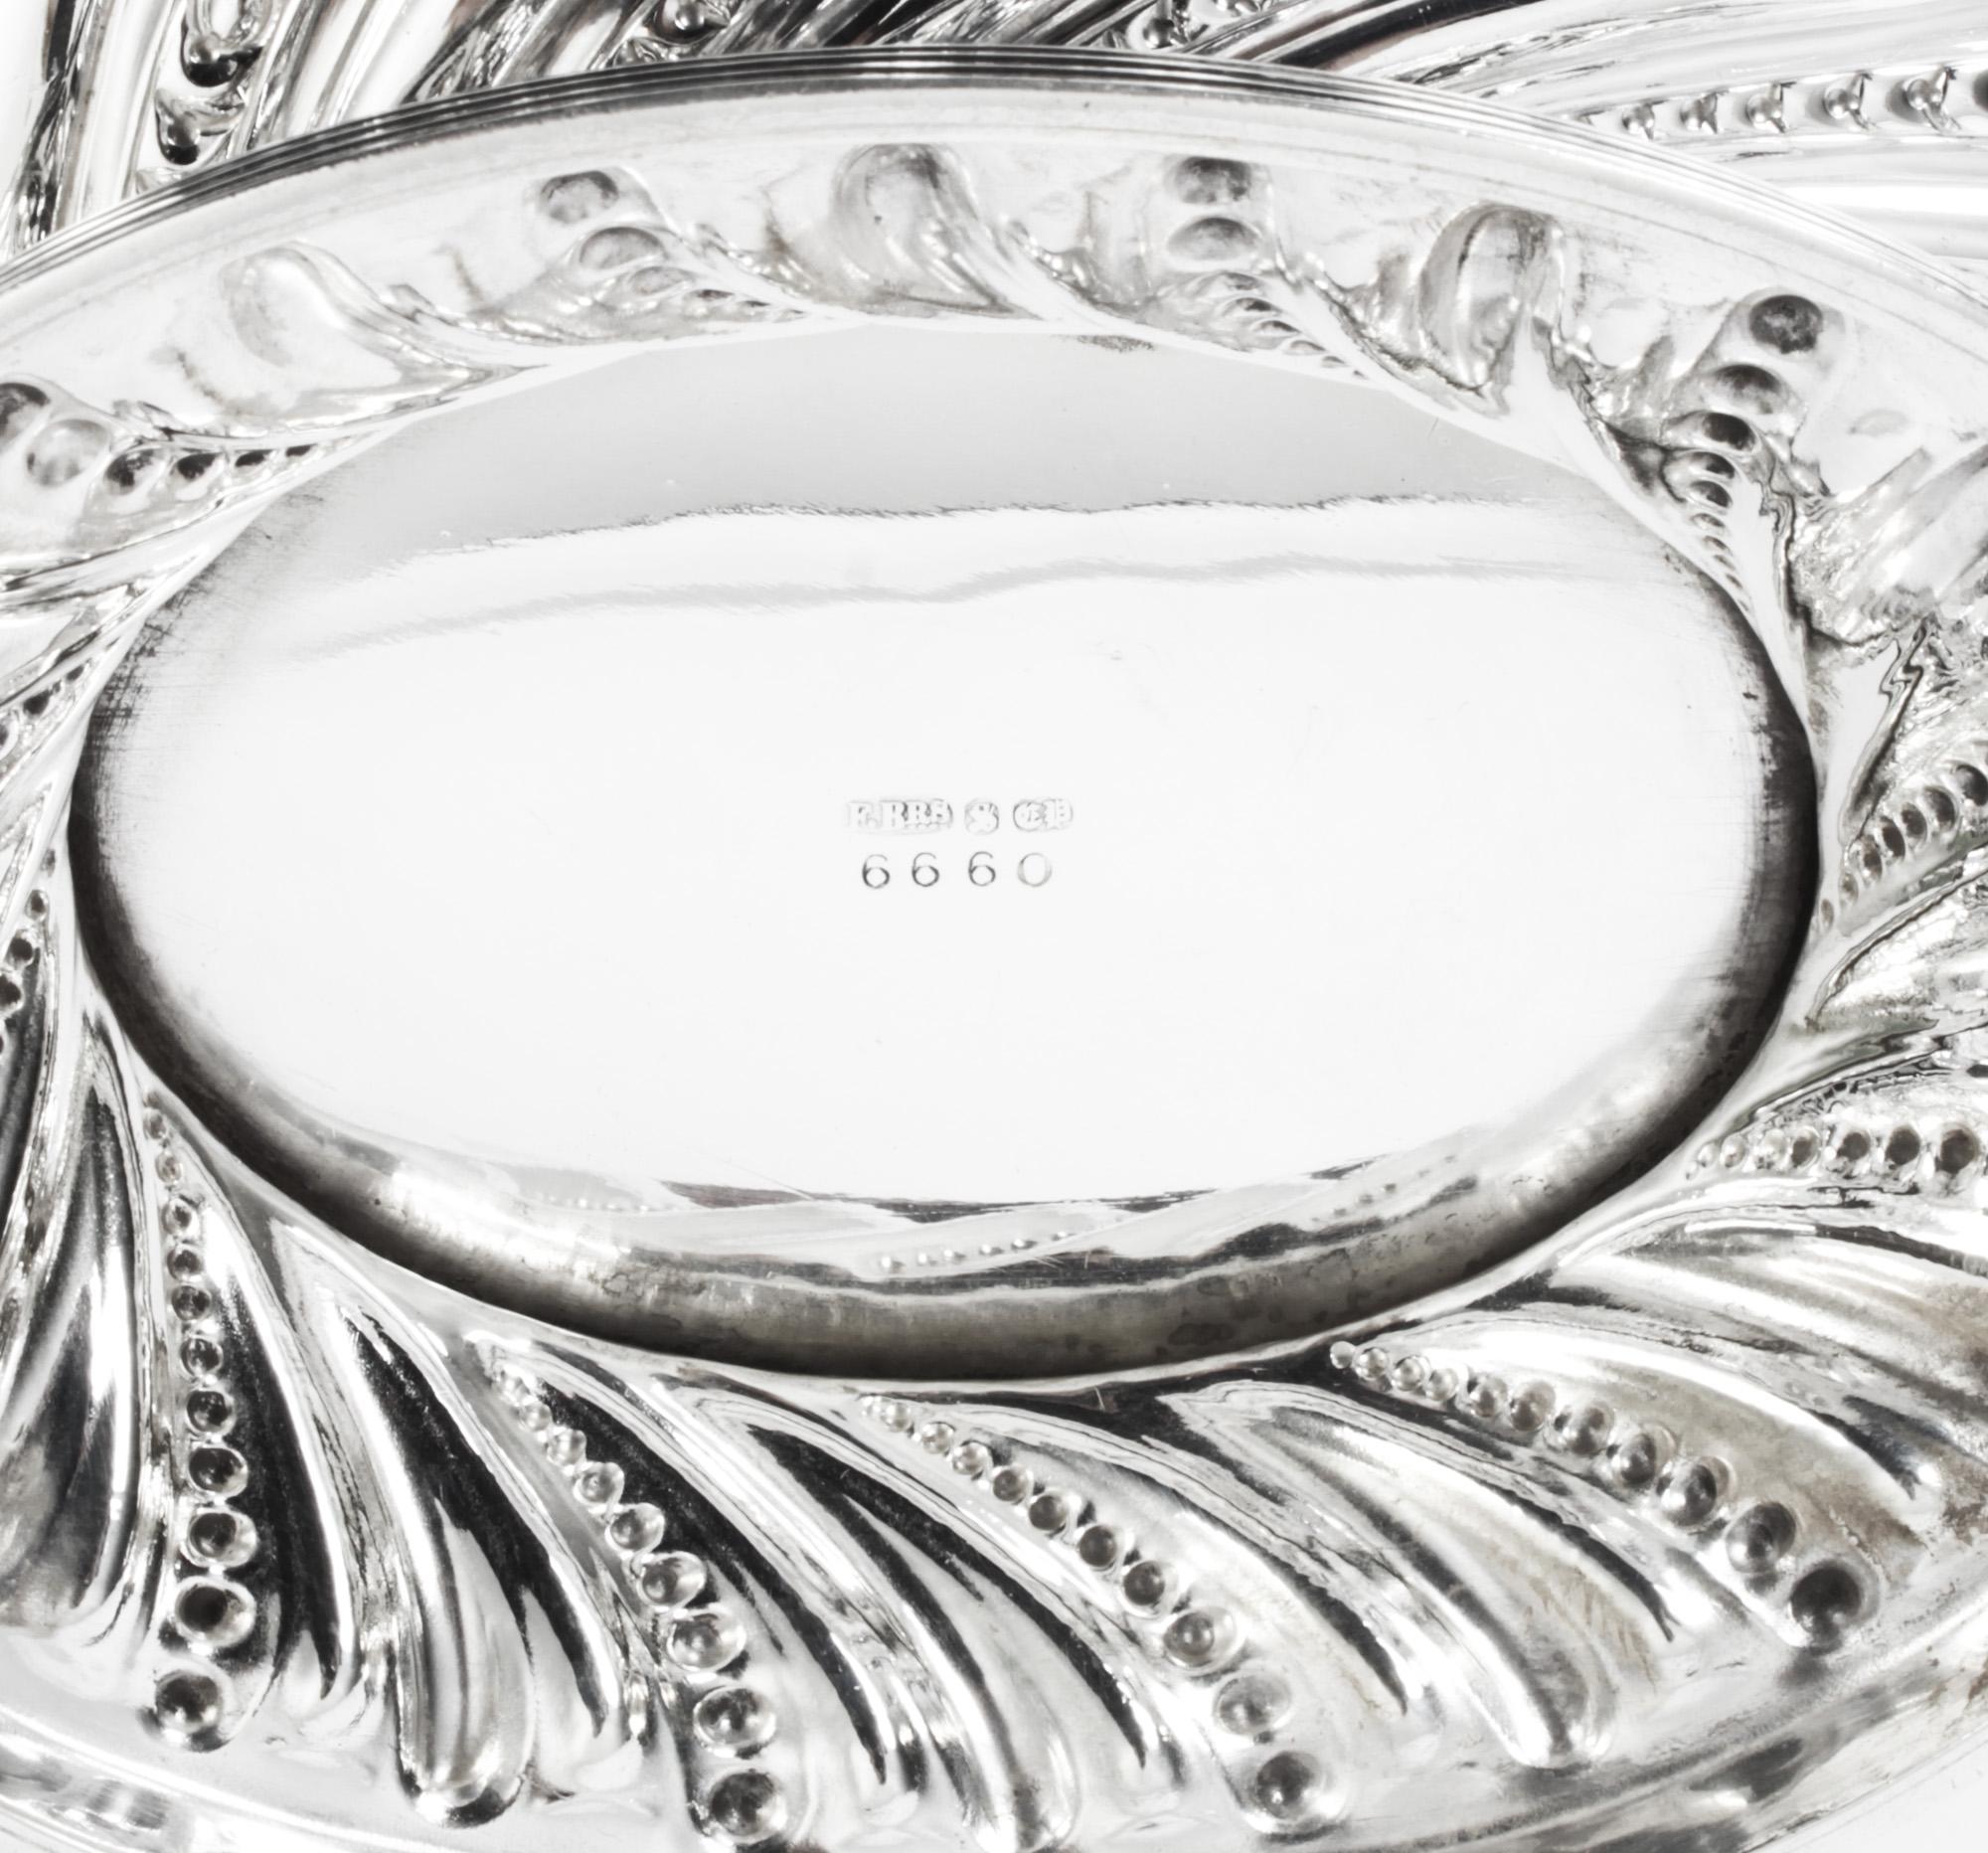 Late 19th Century Antique Victoria Silver Plated Punch Bowl Fenton Brothers Sheffield, 19th C